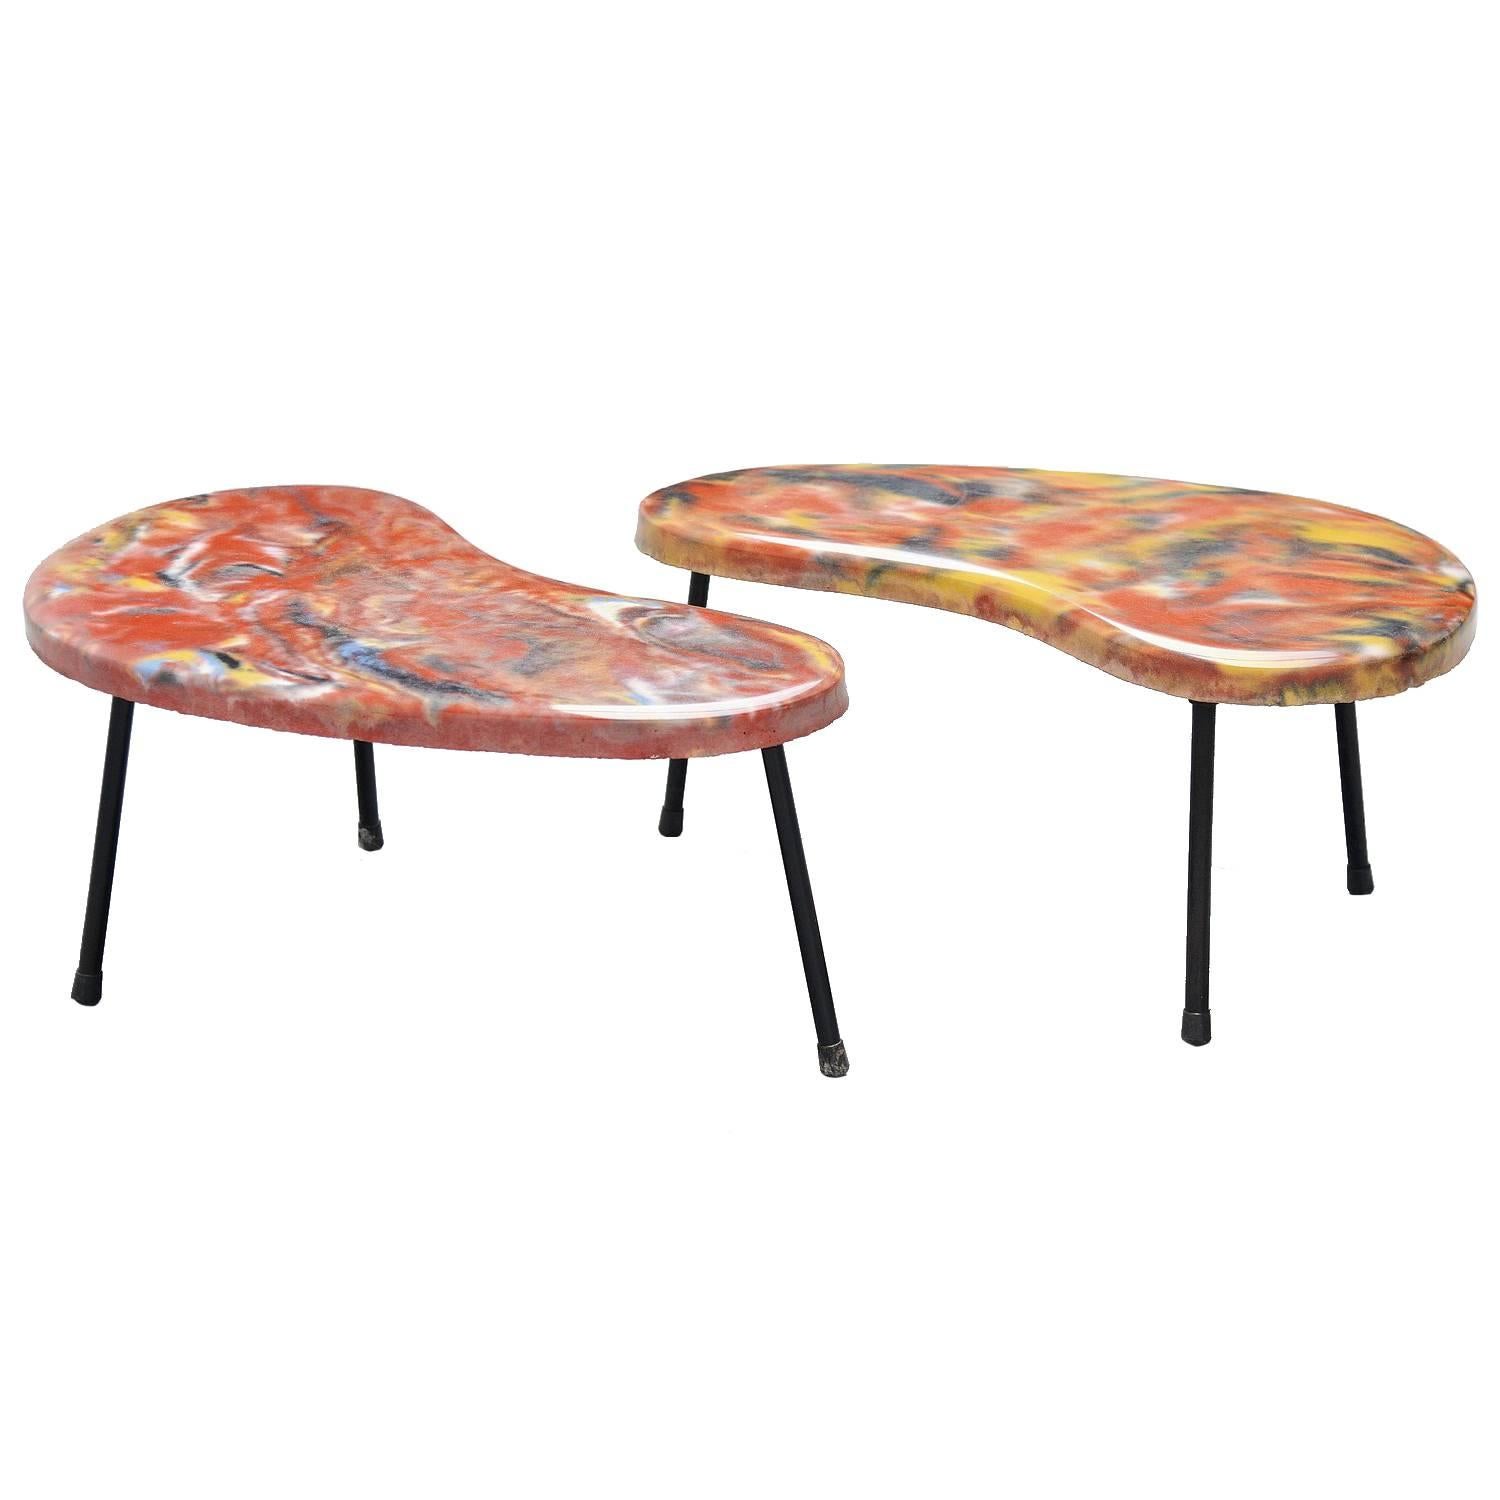 Pair of Kidney Shaped Tables, France, 1960